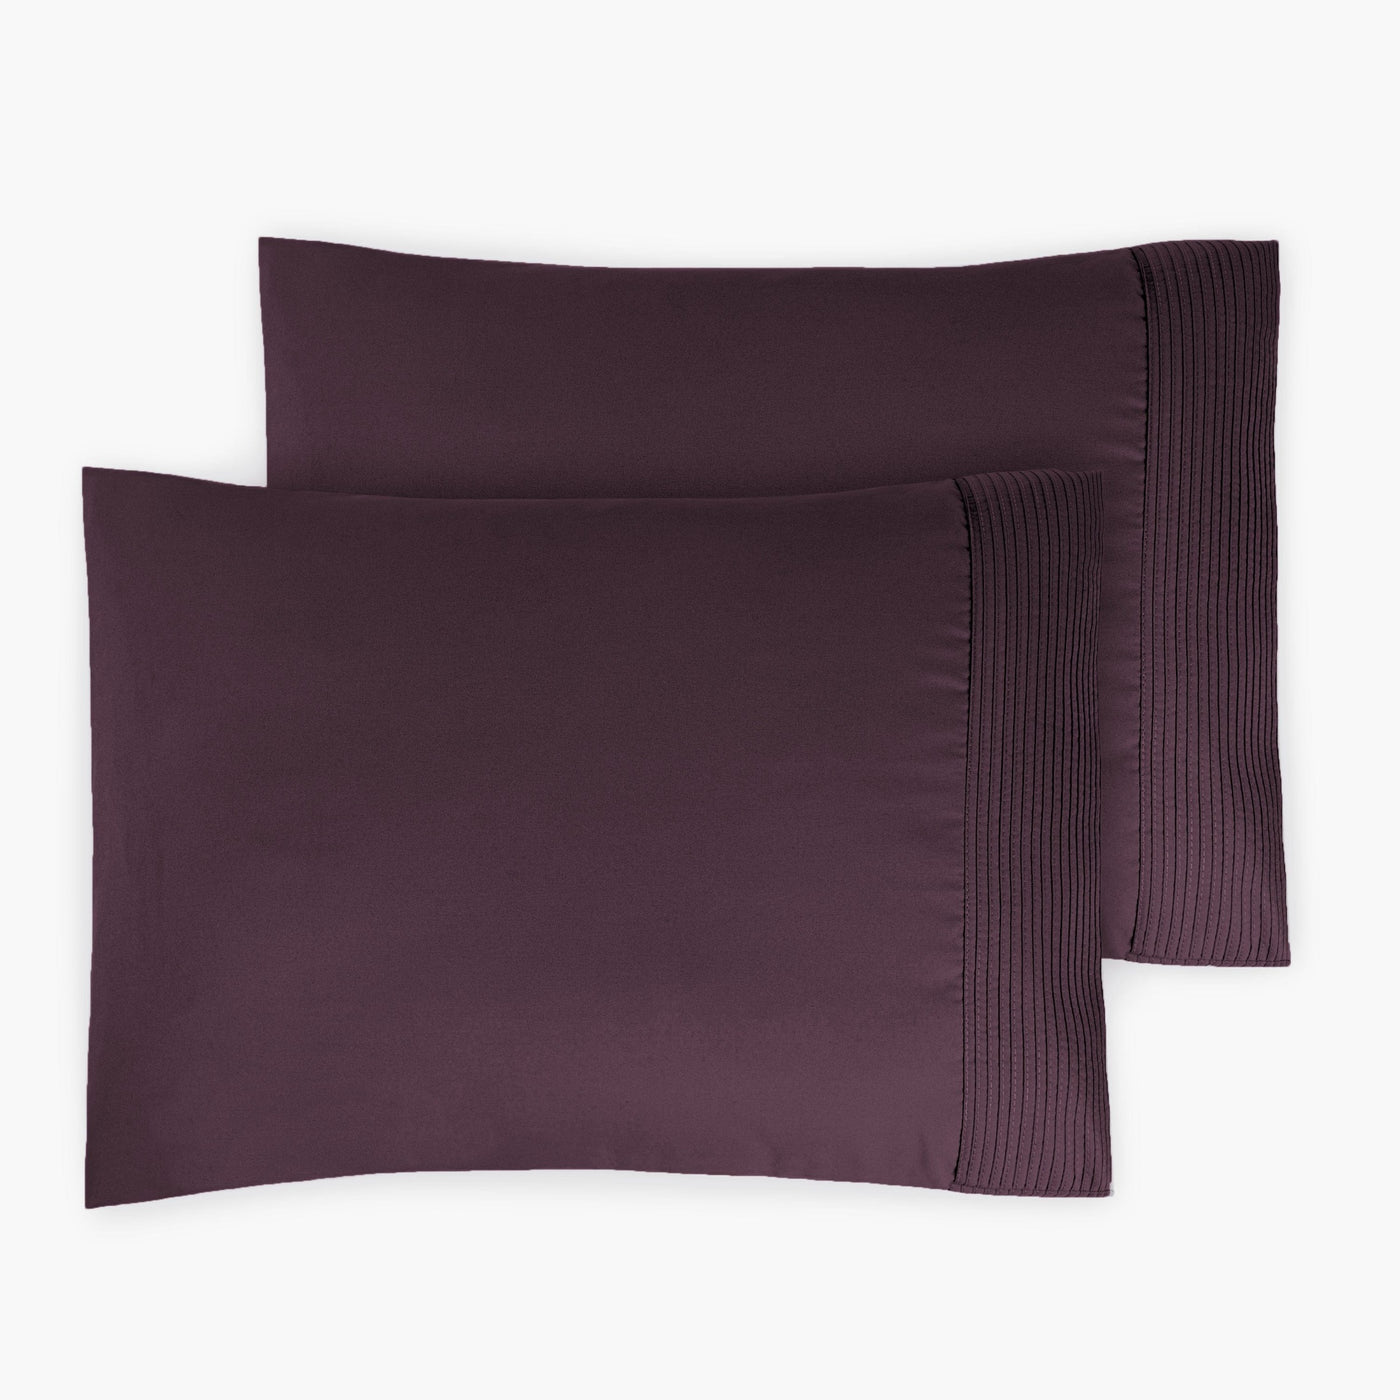 Details and Texture of Vilano Pleated Pillow Cases in Purple#color_vilano-purple